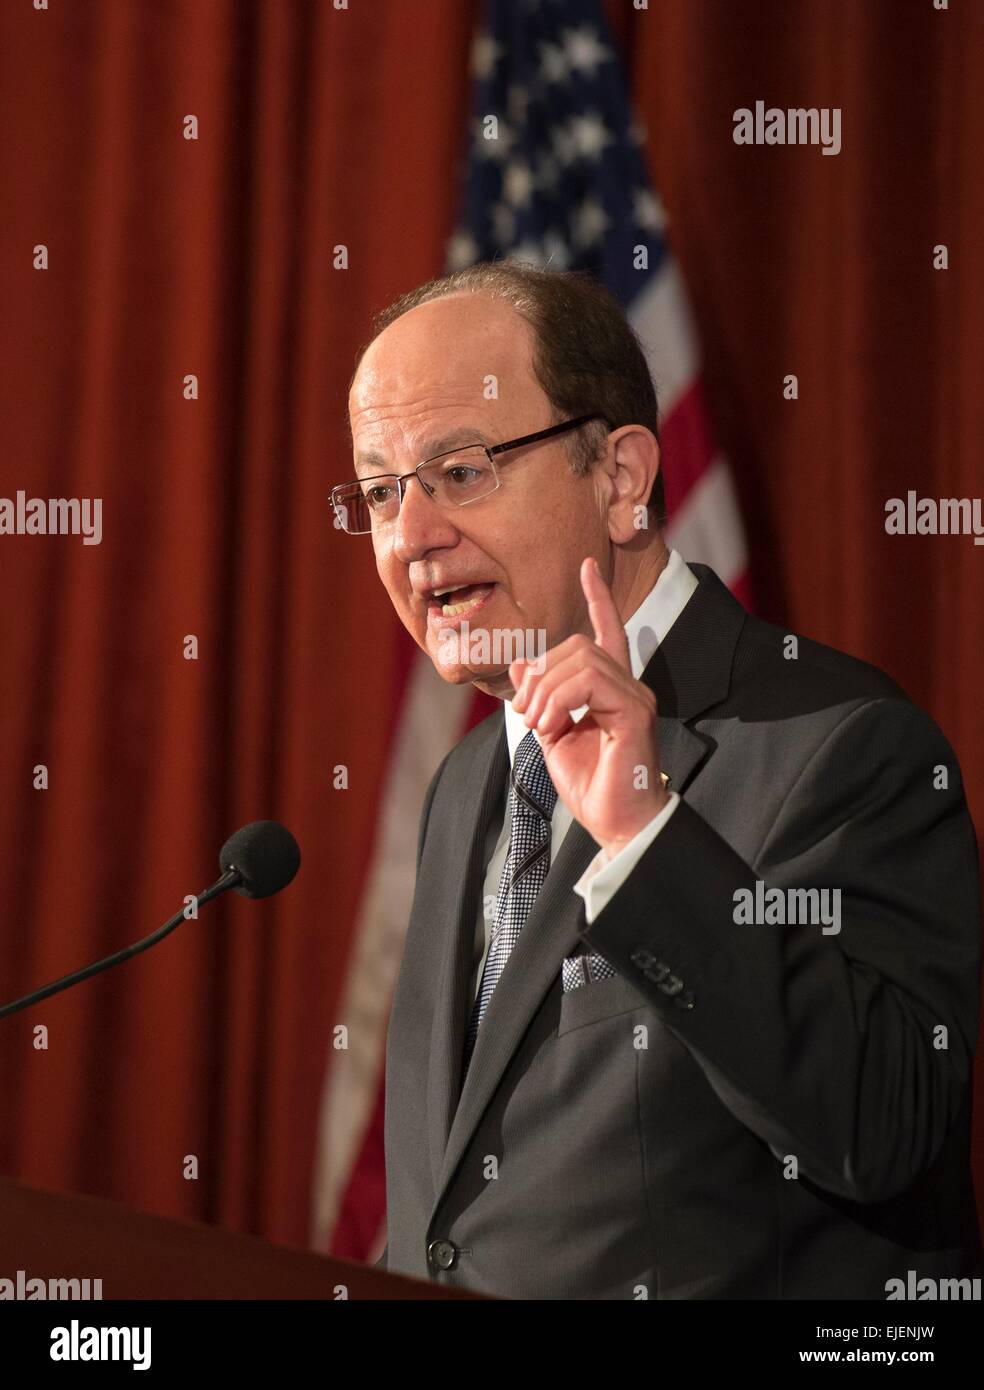 University of Southern California President  C.L. Max Nikias speaks during a forum on military veteran issues at the University of Southern California campus March 23, 2015 in Los Angeles, California. Stock Photo